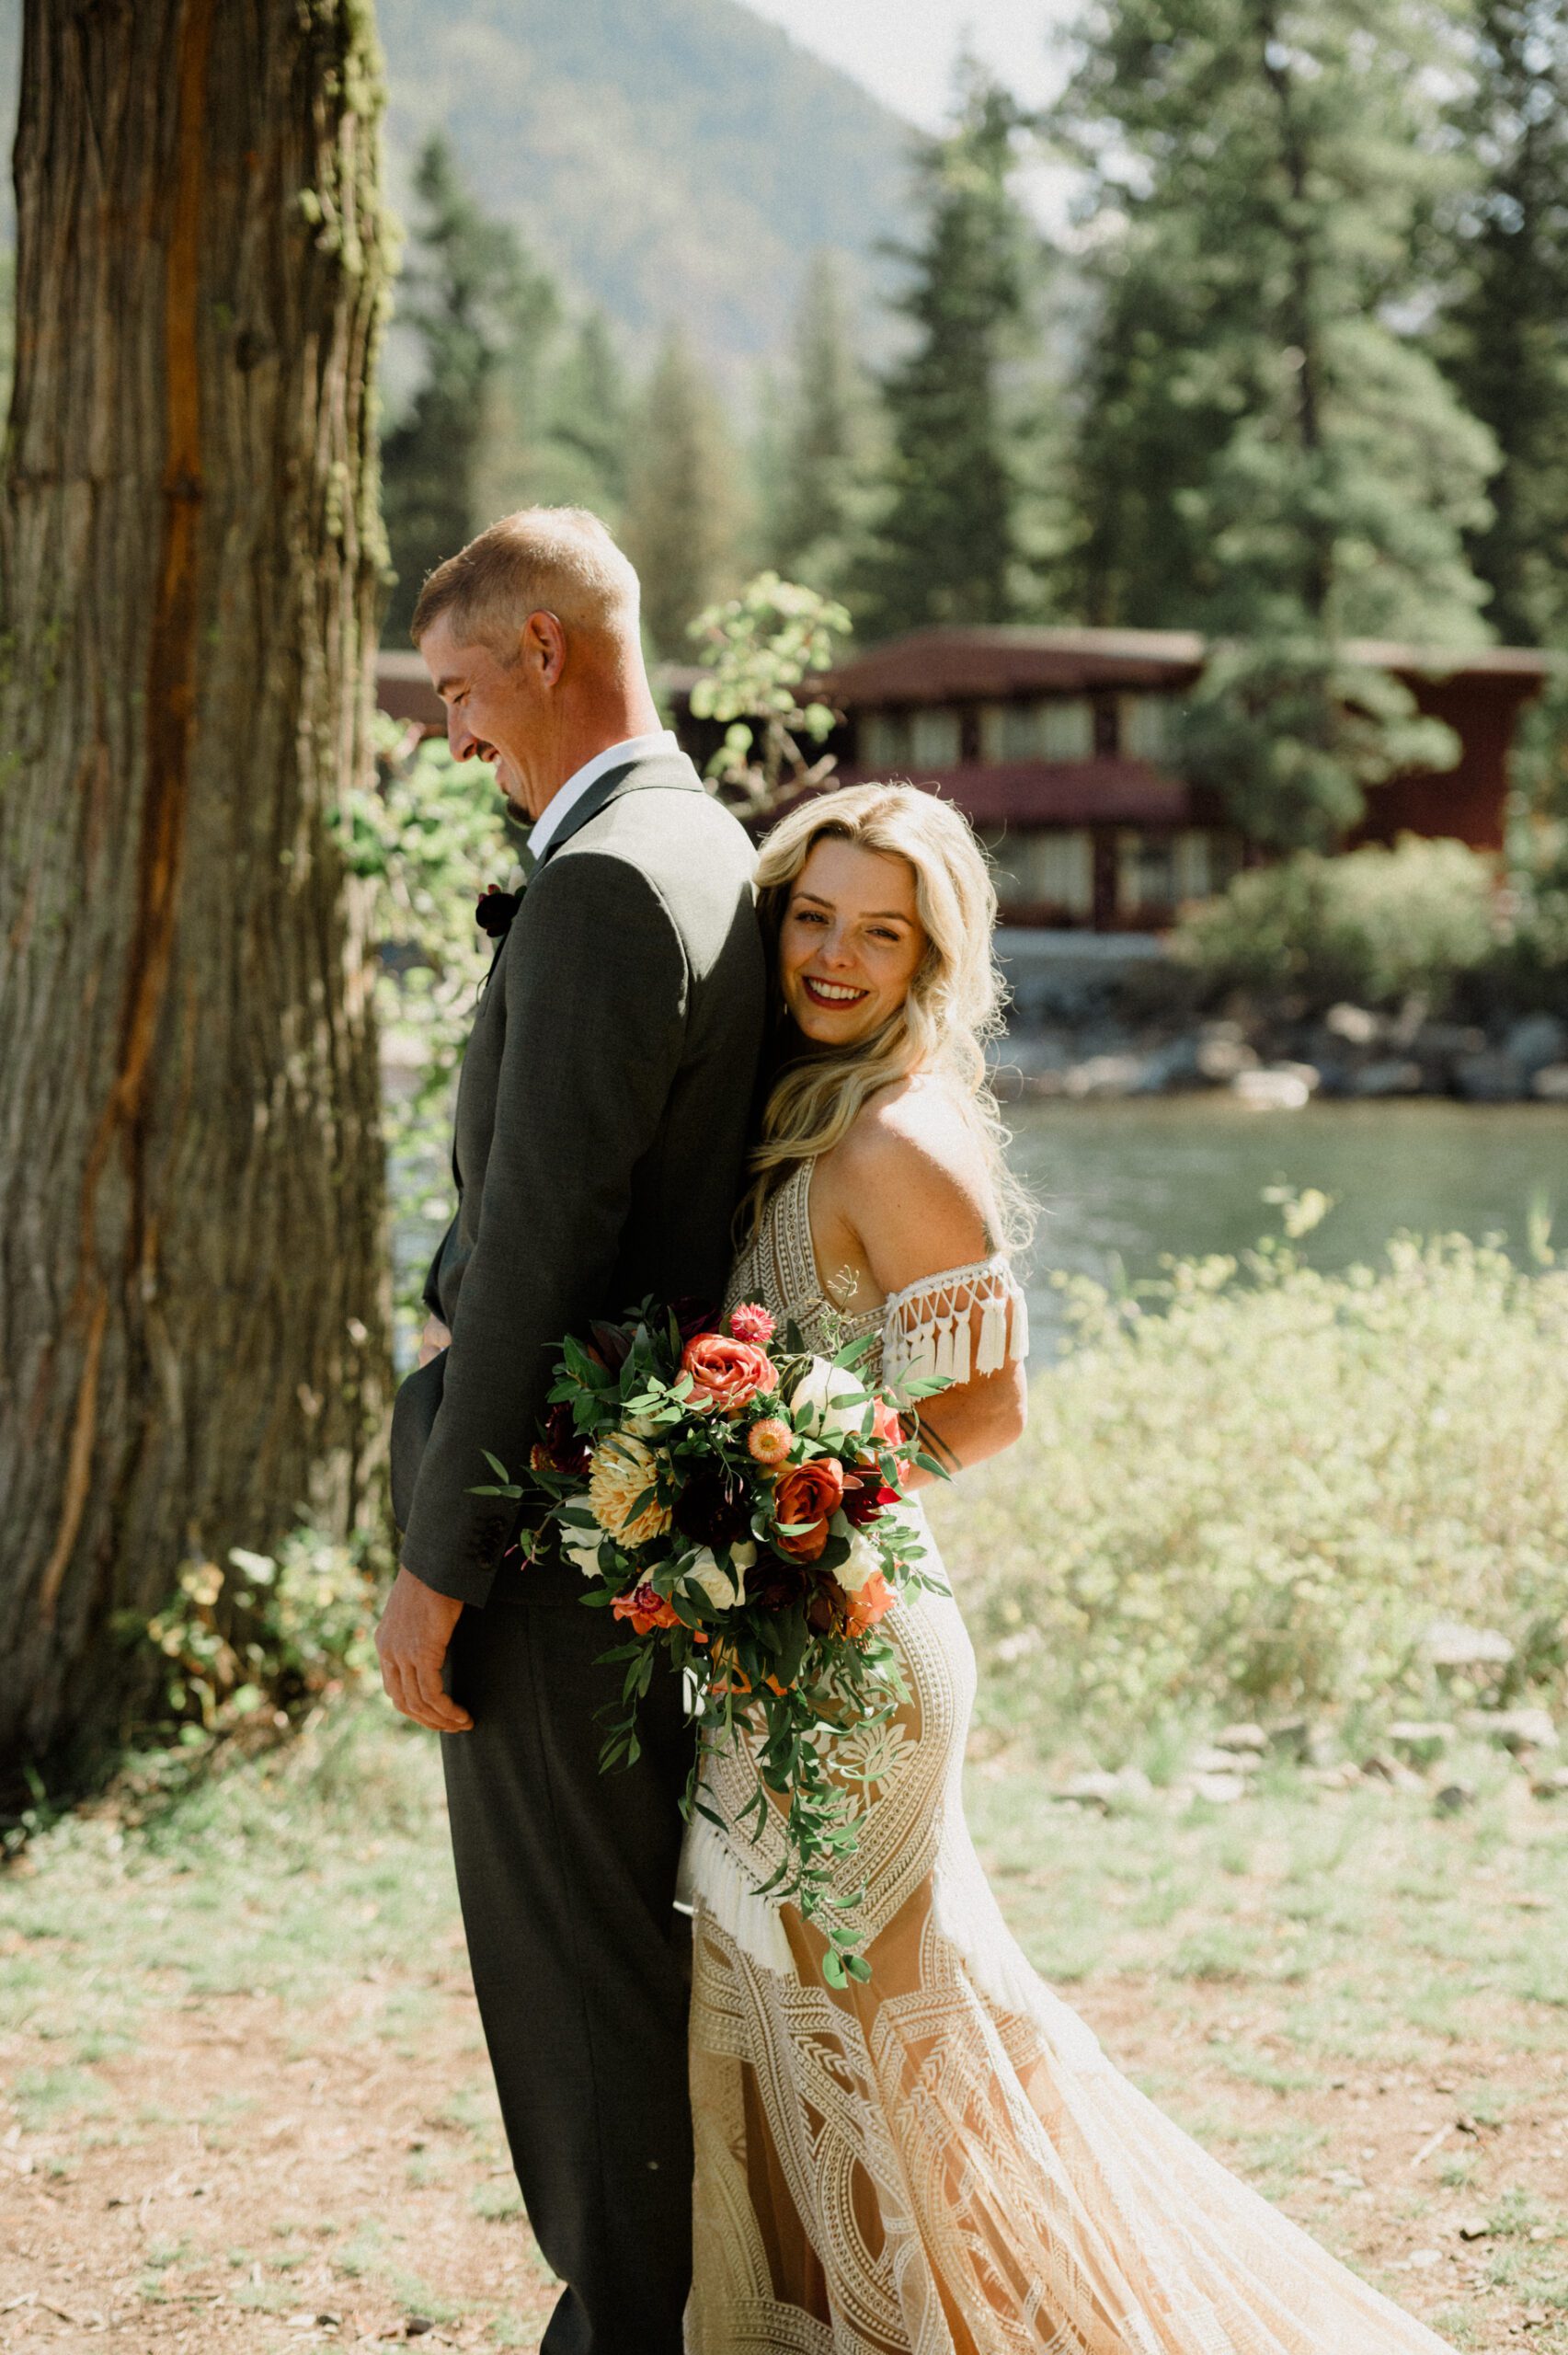 All-Inclusive Glacier National Park Wedding - 2 epic days in Montana